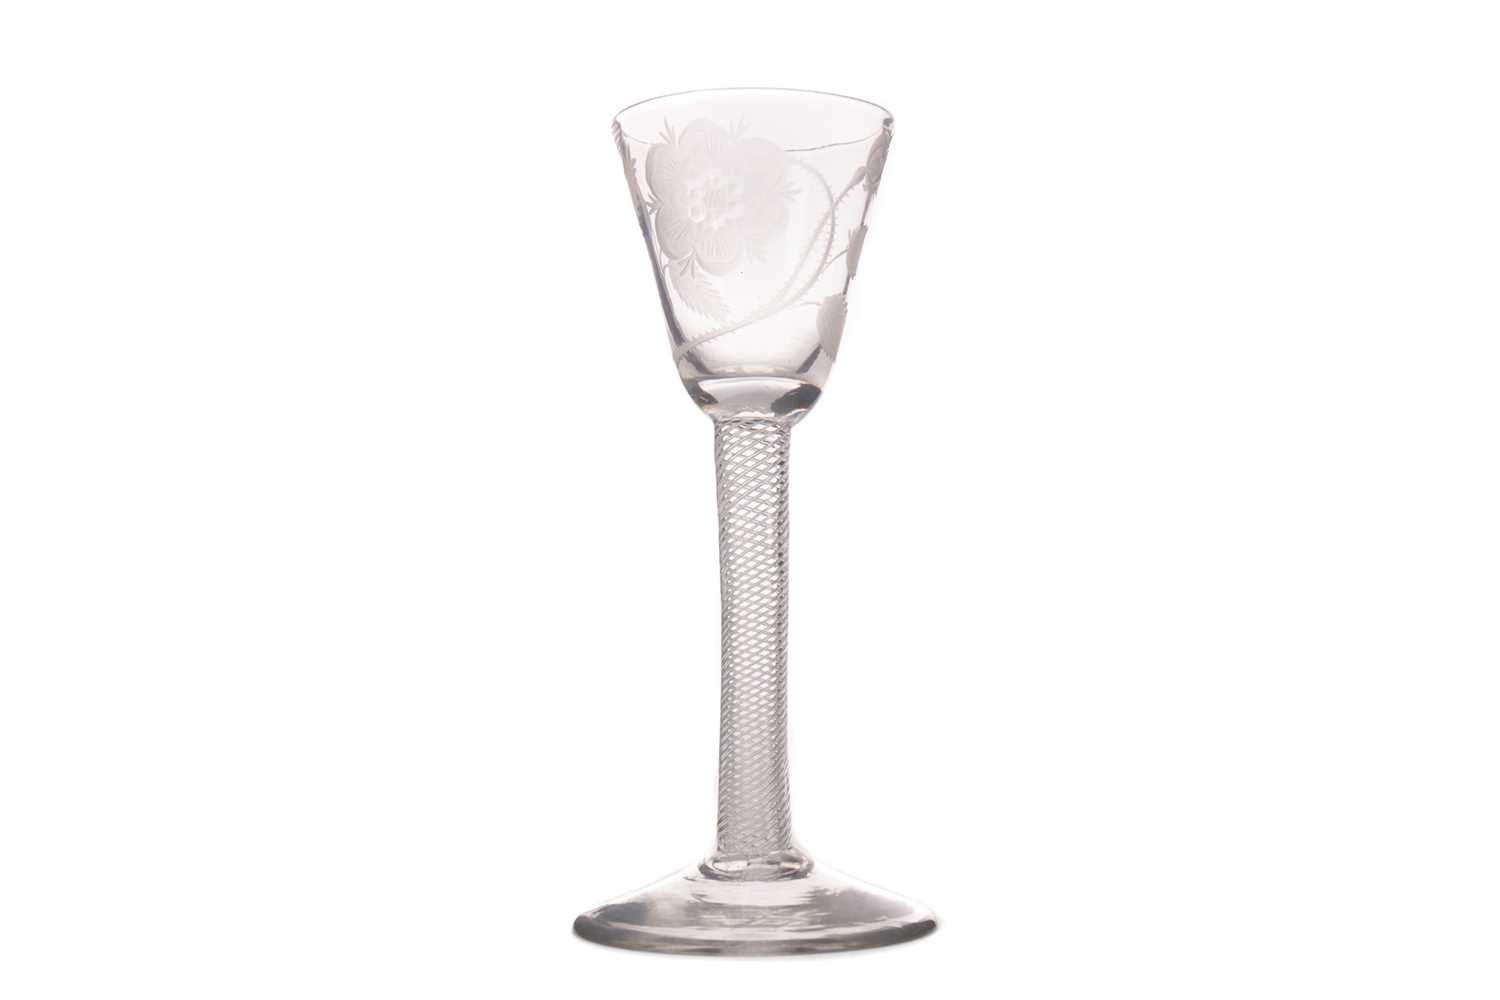 Lot 771 - A MID-18TH CENTURY WINE GLASS OF JACOBITE SIGNIFICANCE